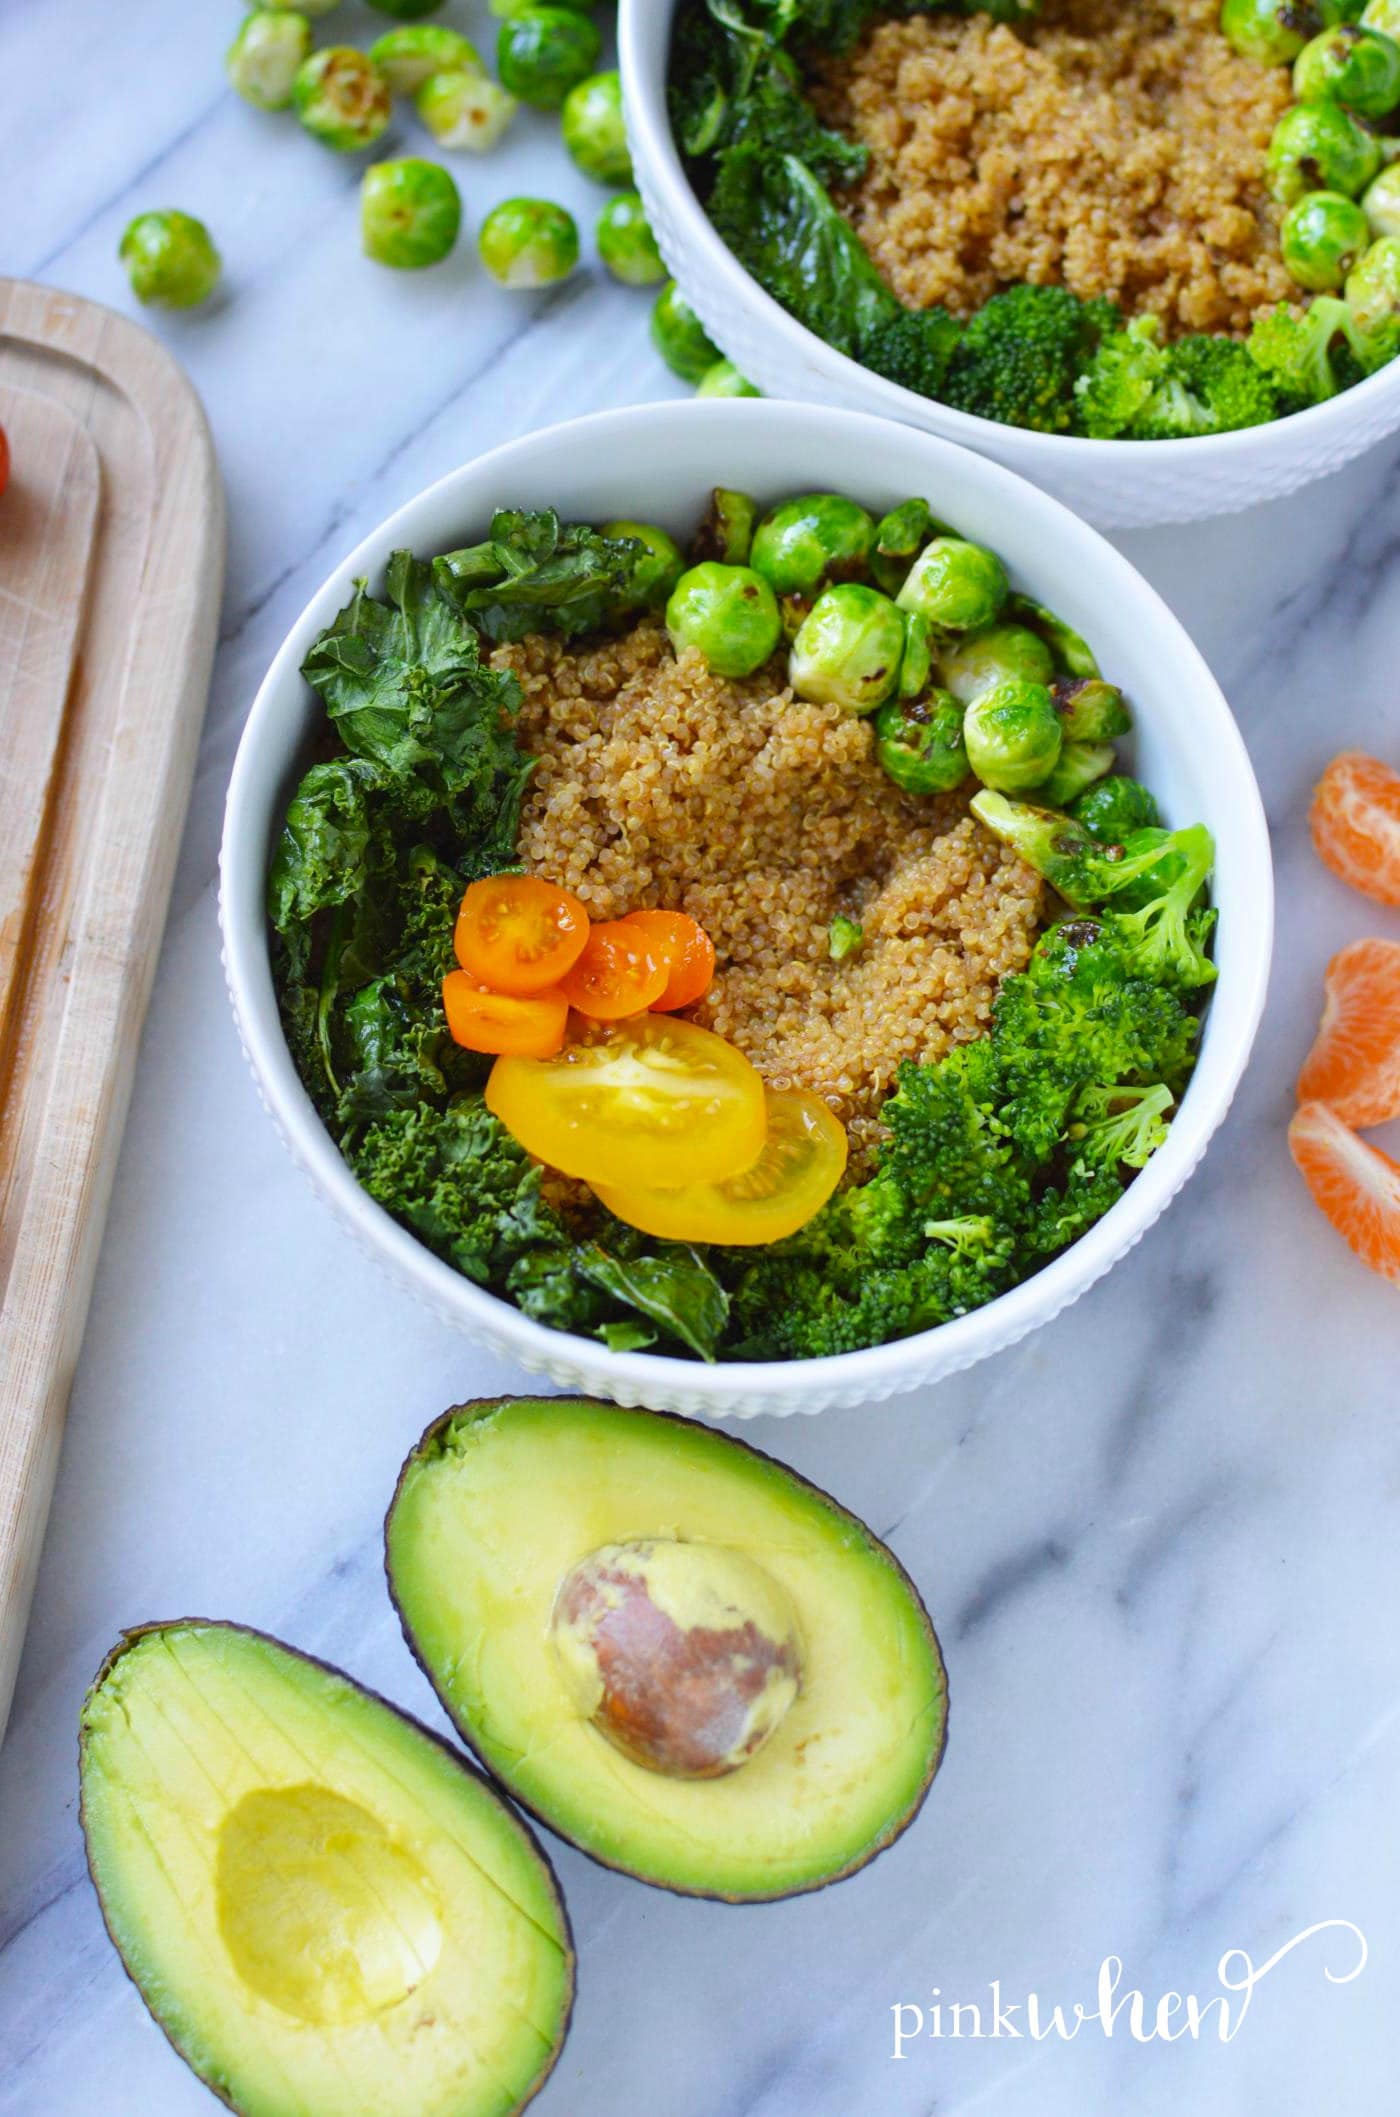 Easy Instant Pot Quinoa Grain Bowl. Learn how to make Quinoa with the Instant Pot and create a healthy grain bowl. 4